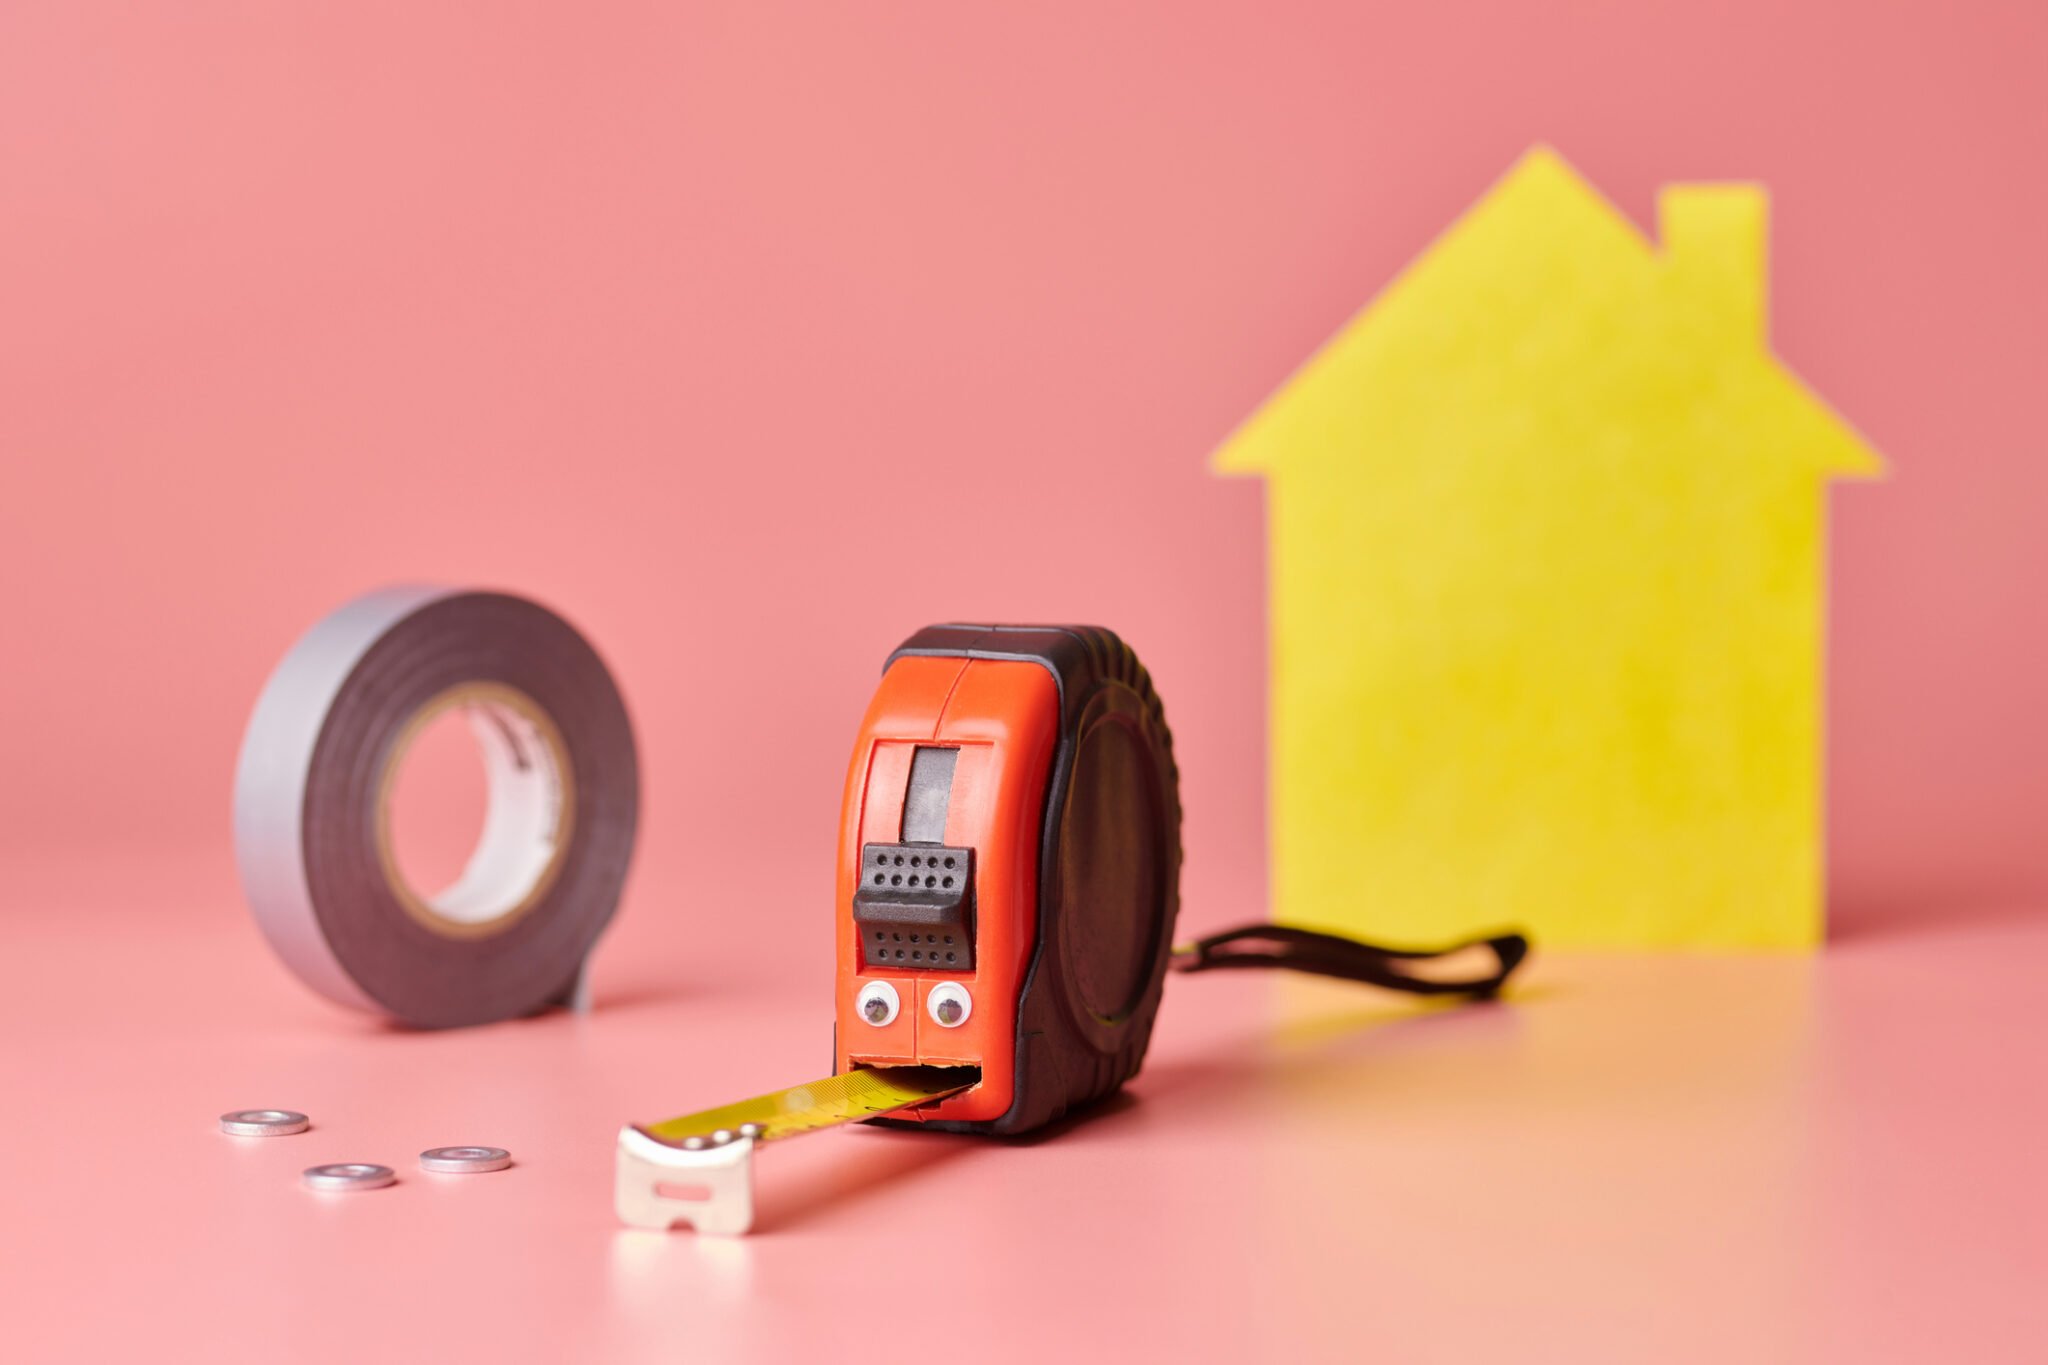 A roll of tape, and a tape measure next to a house shape